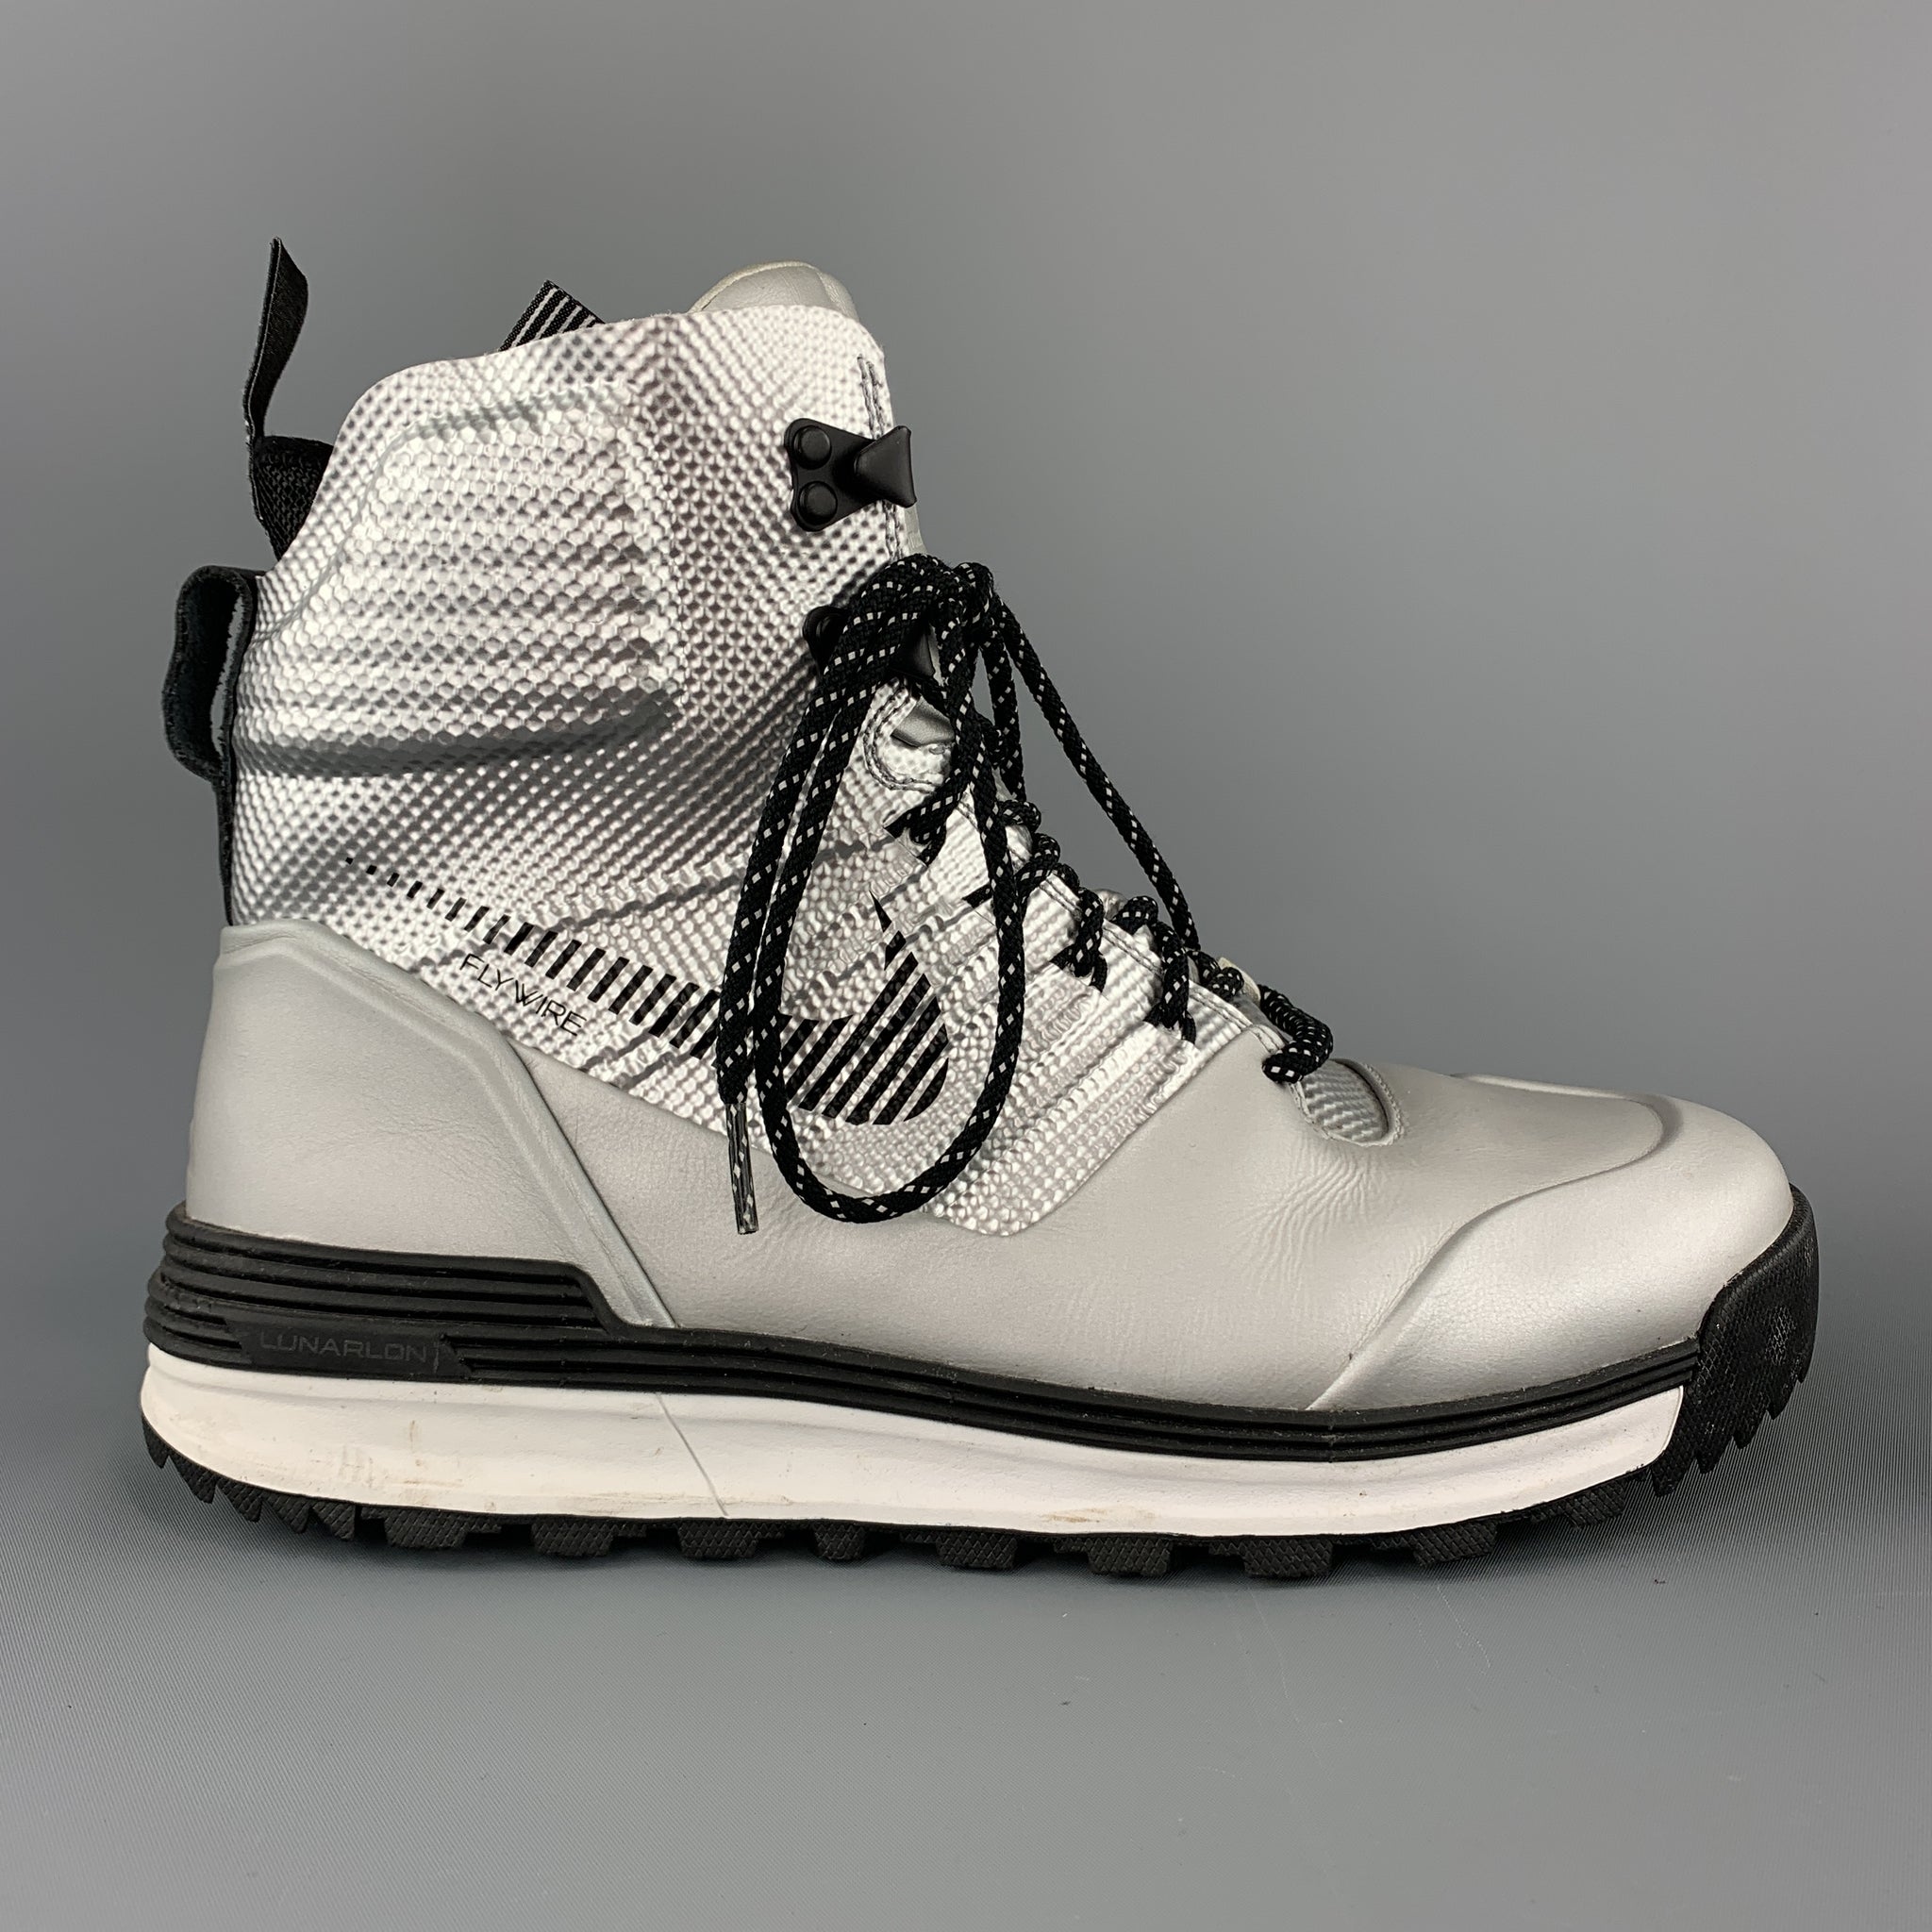 nike h20 repel boots